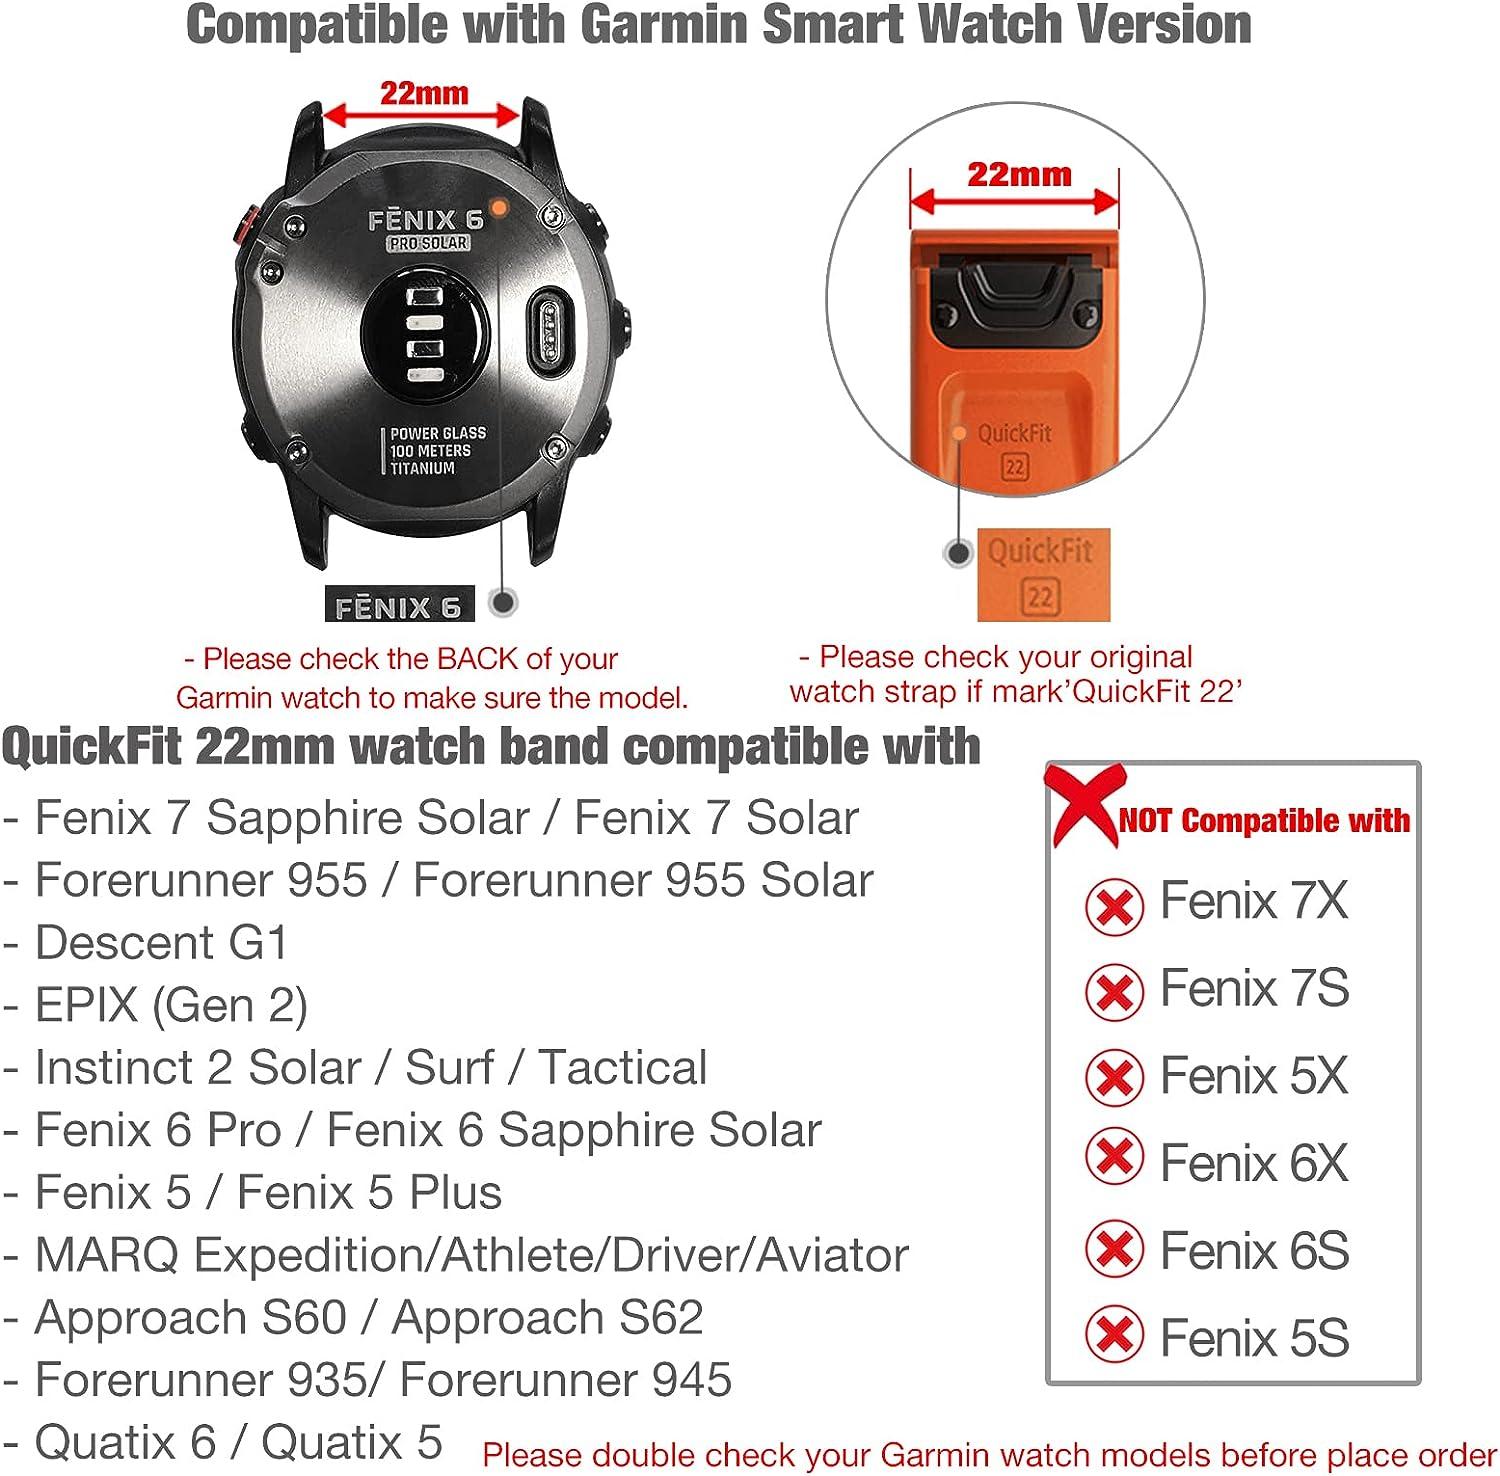 Garmin Fenix 5 Plus Specifications, Features and Price - Geeky Wrist